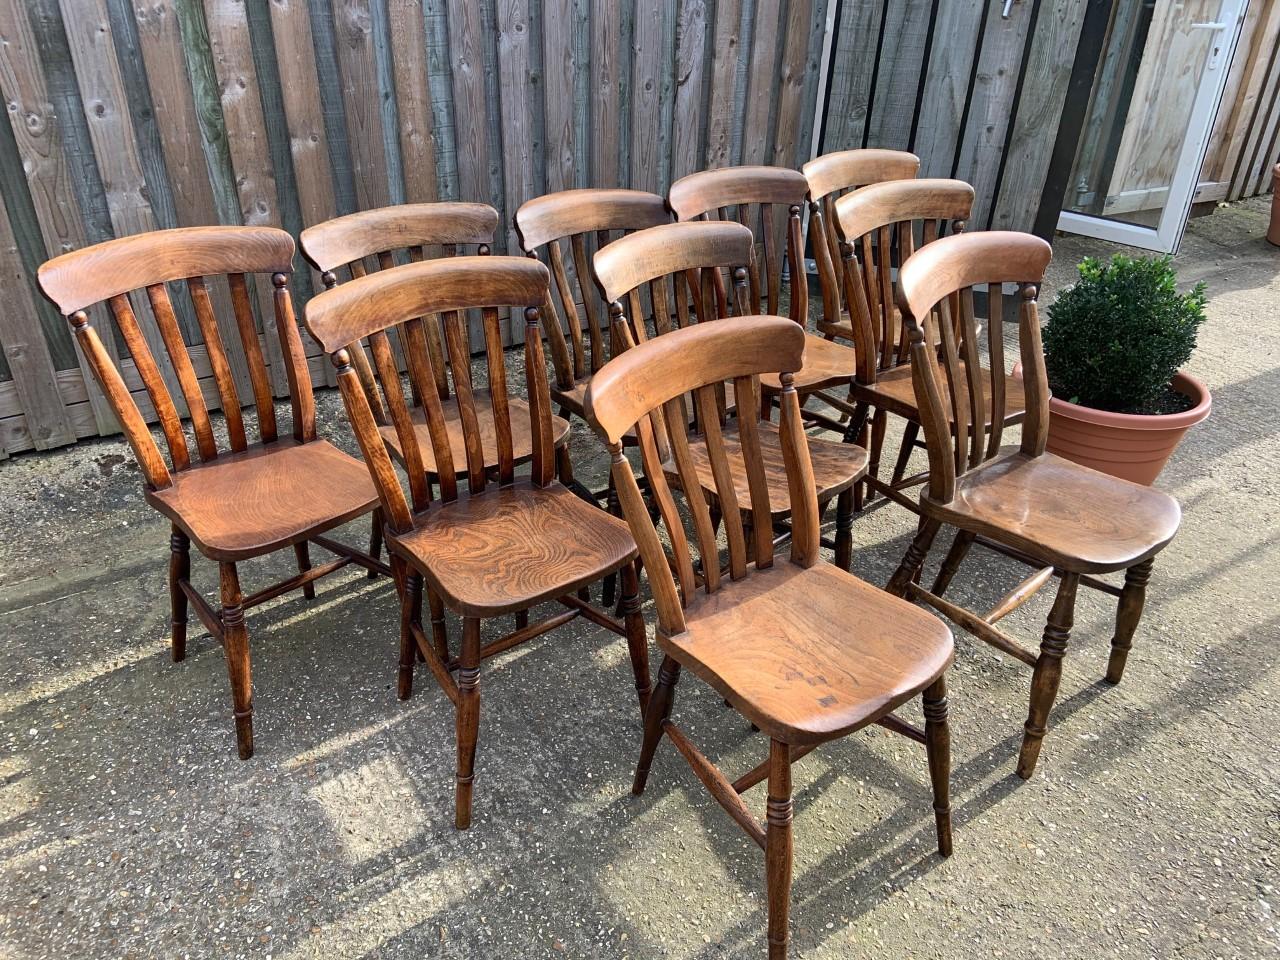 Ten 19th century lath back dining chairs, with superb color and patination. Fully restored and all very sturdy comfortable chairs.